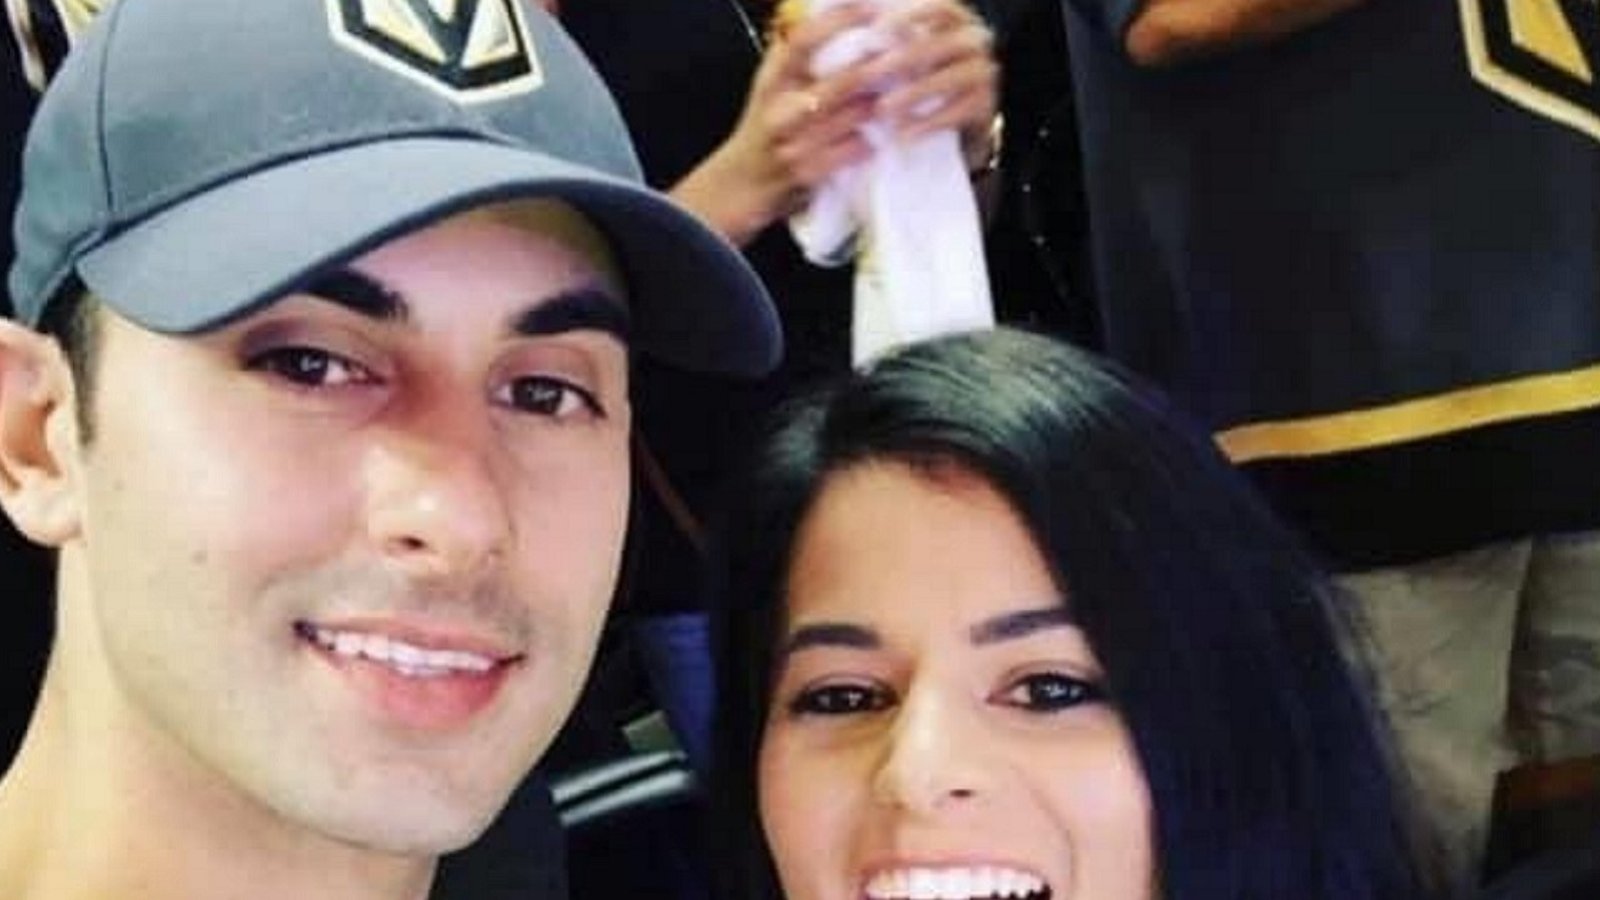 Golden Knights fan identified as officer shot in the back of the head during riots last Monday.